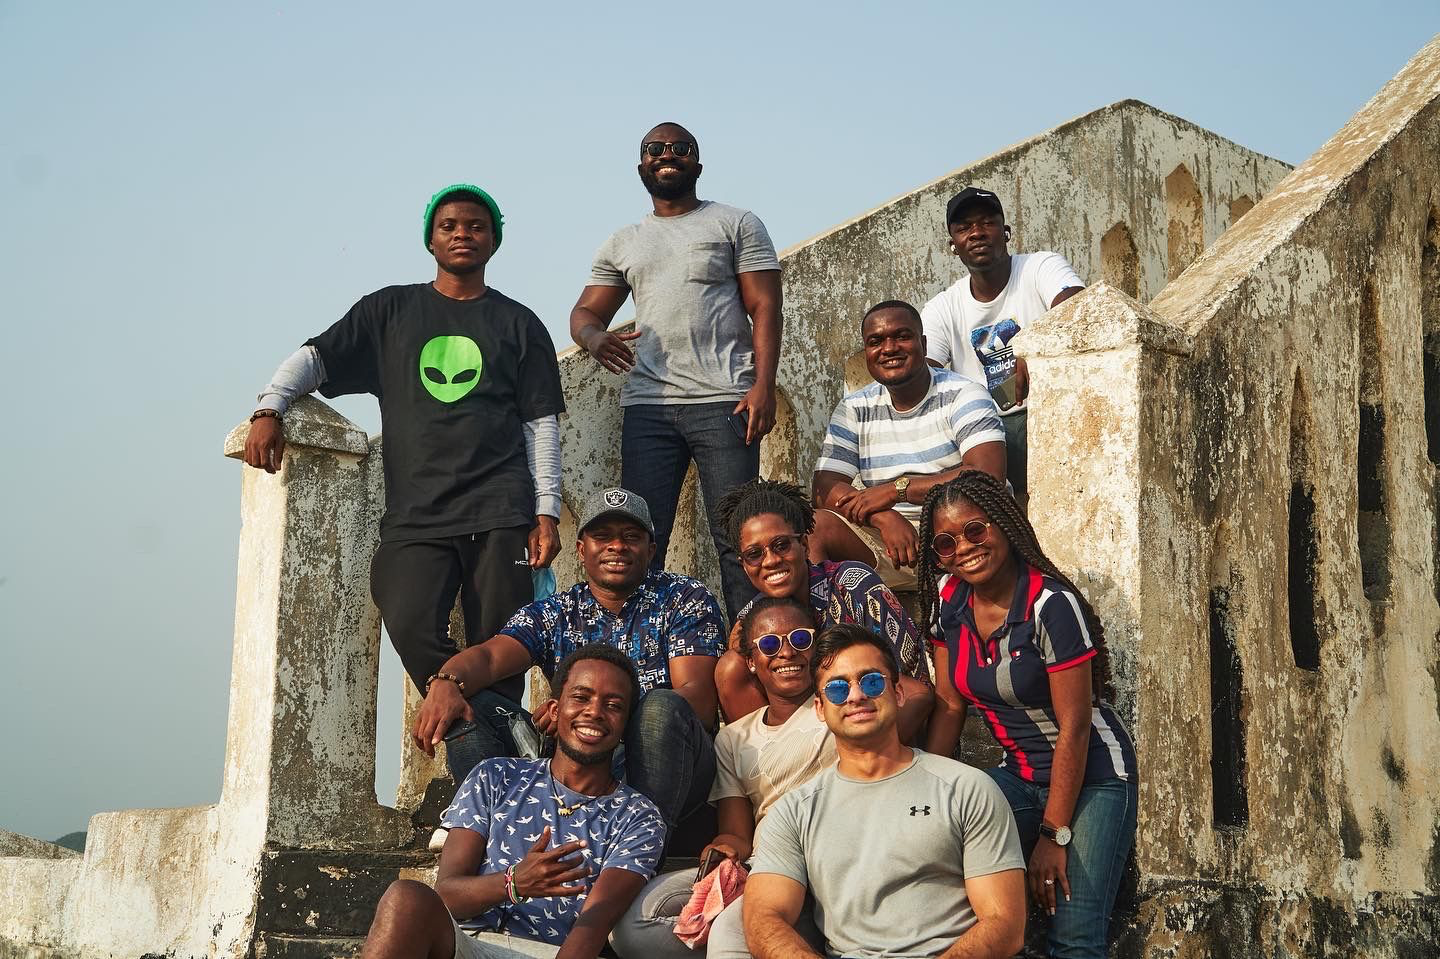 Top 5 Locations for Team-Bonding in Africa for Remote Teams